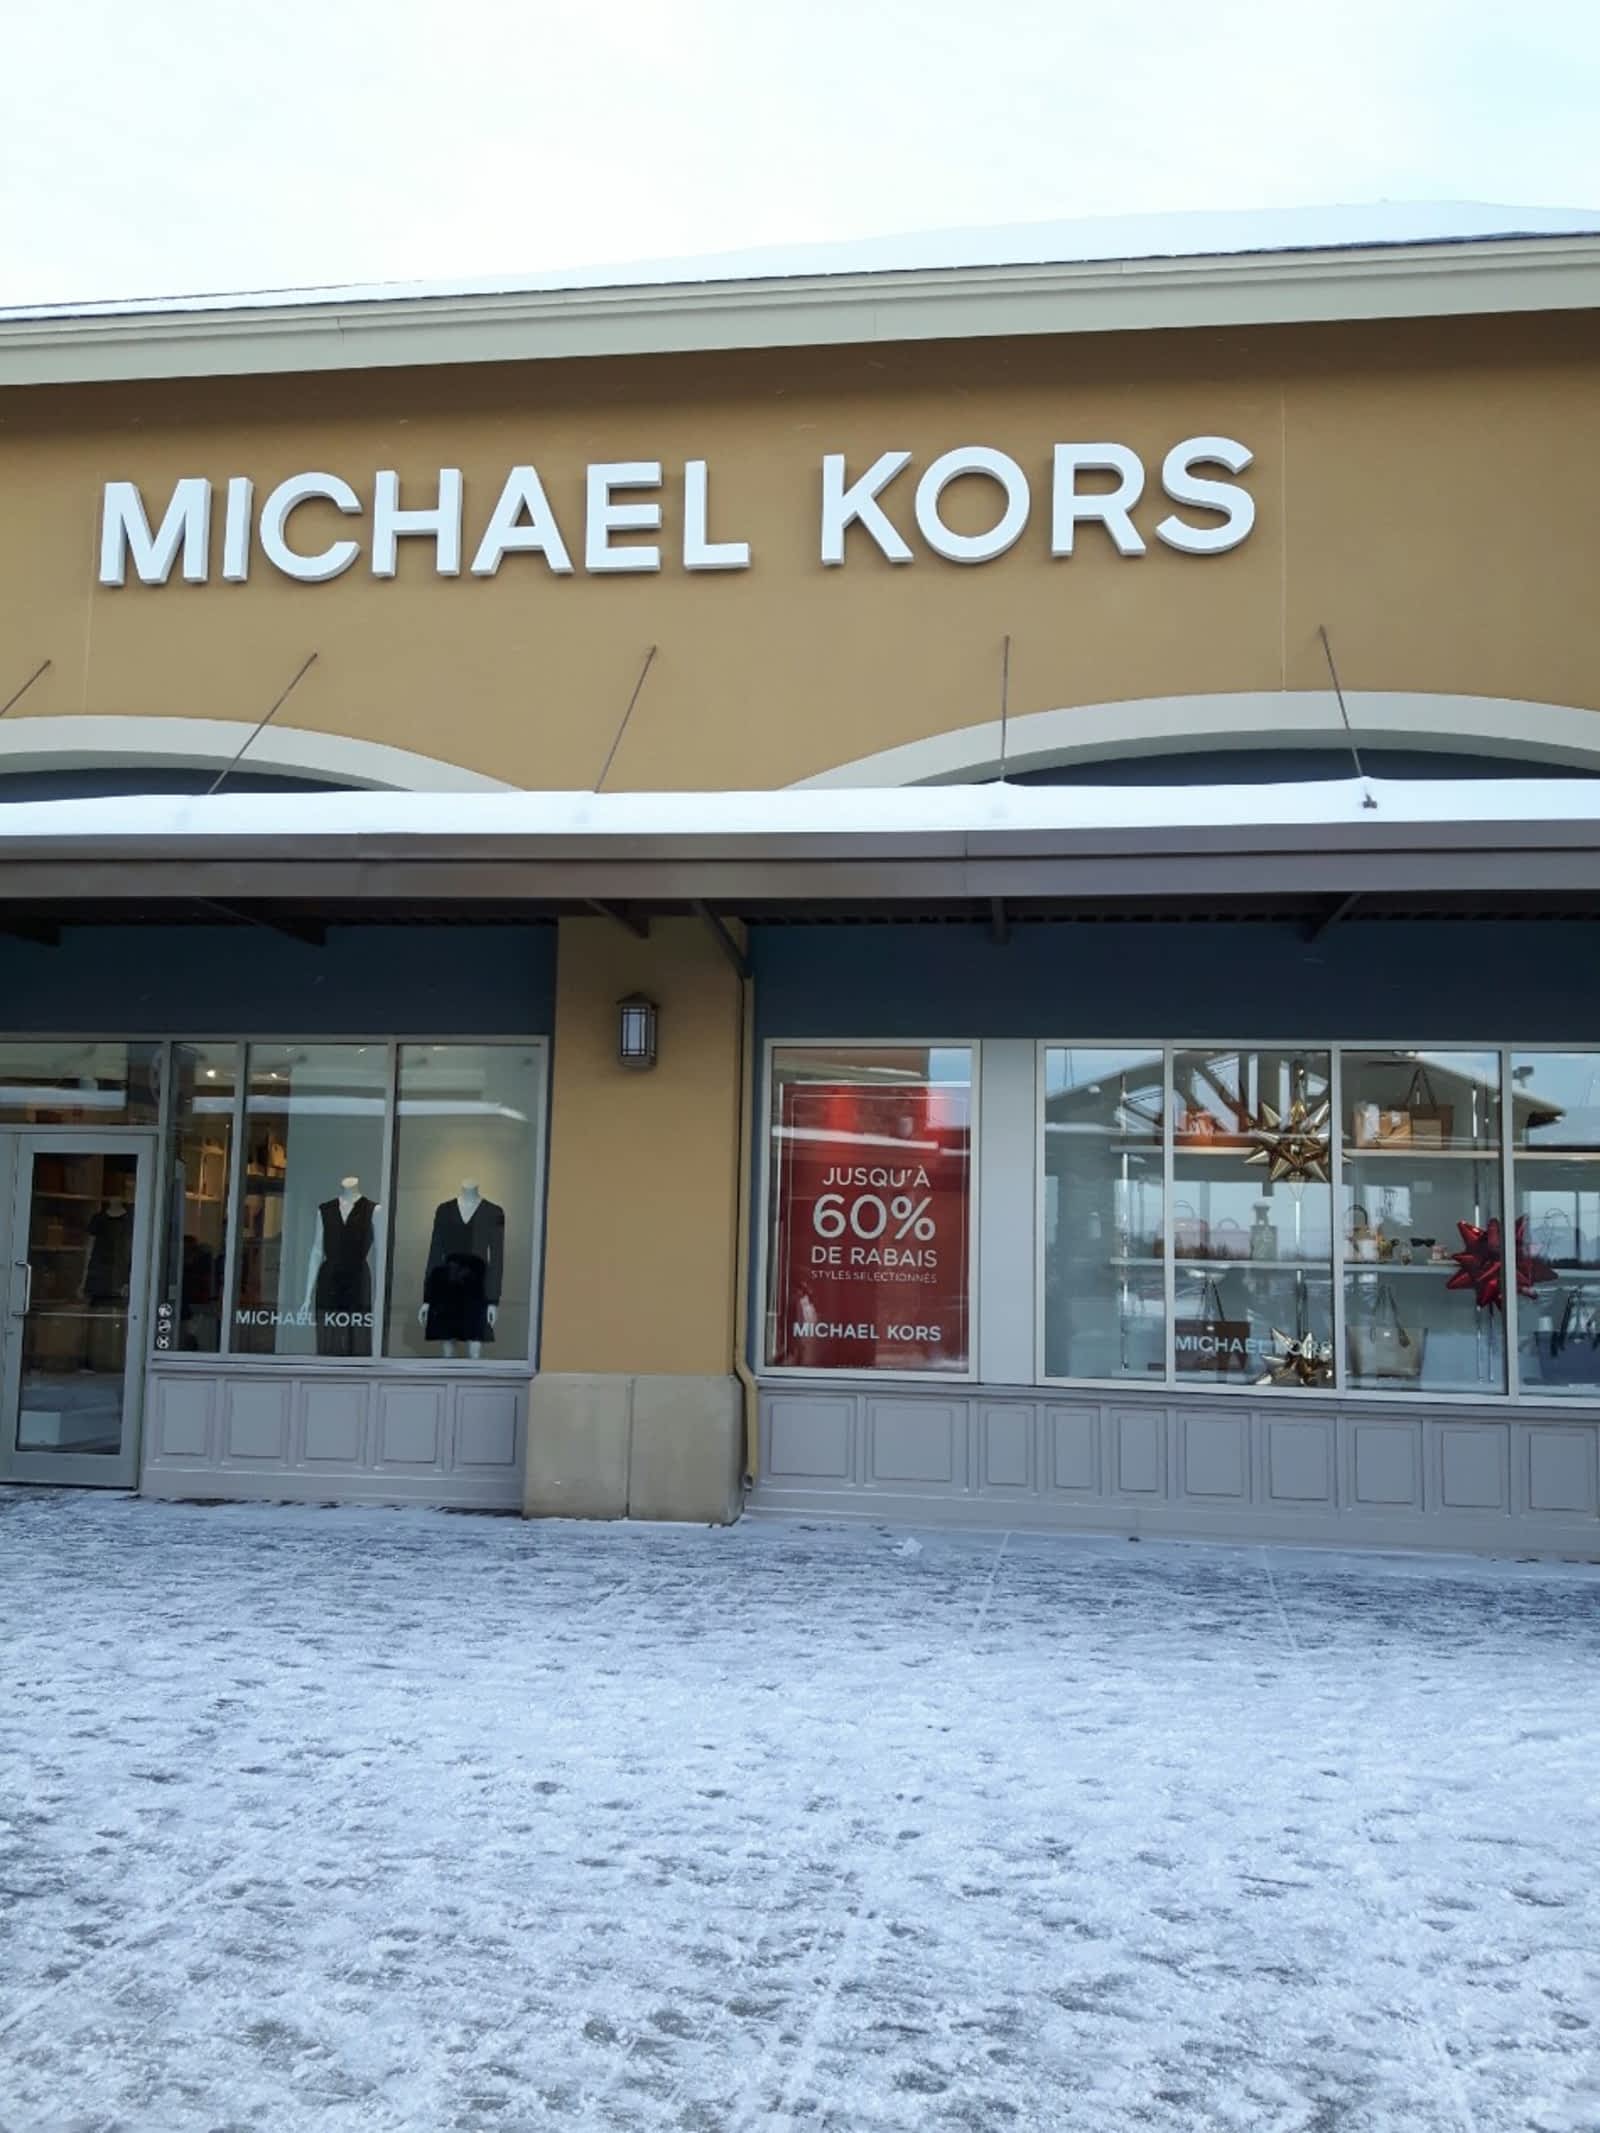 Michael Kors Outlet - Opening Hours 